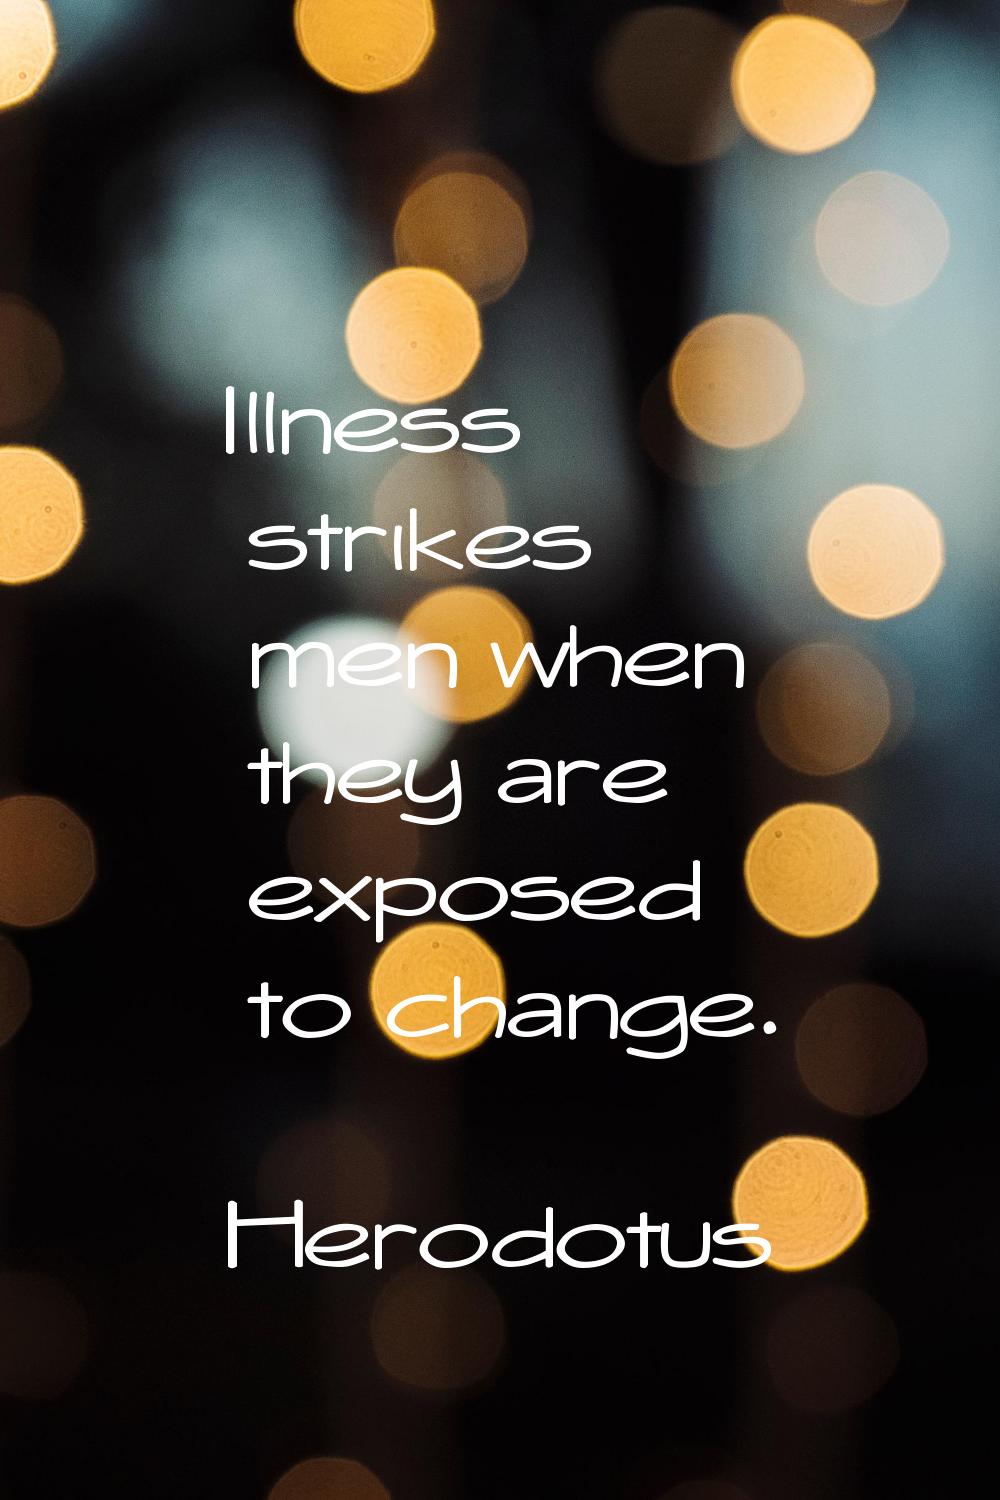 Illness strikes men when they are exposed to change.